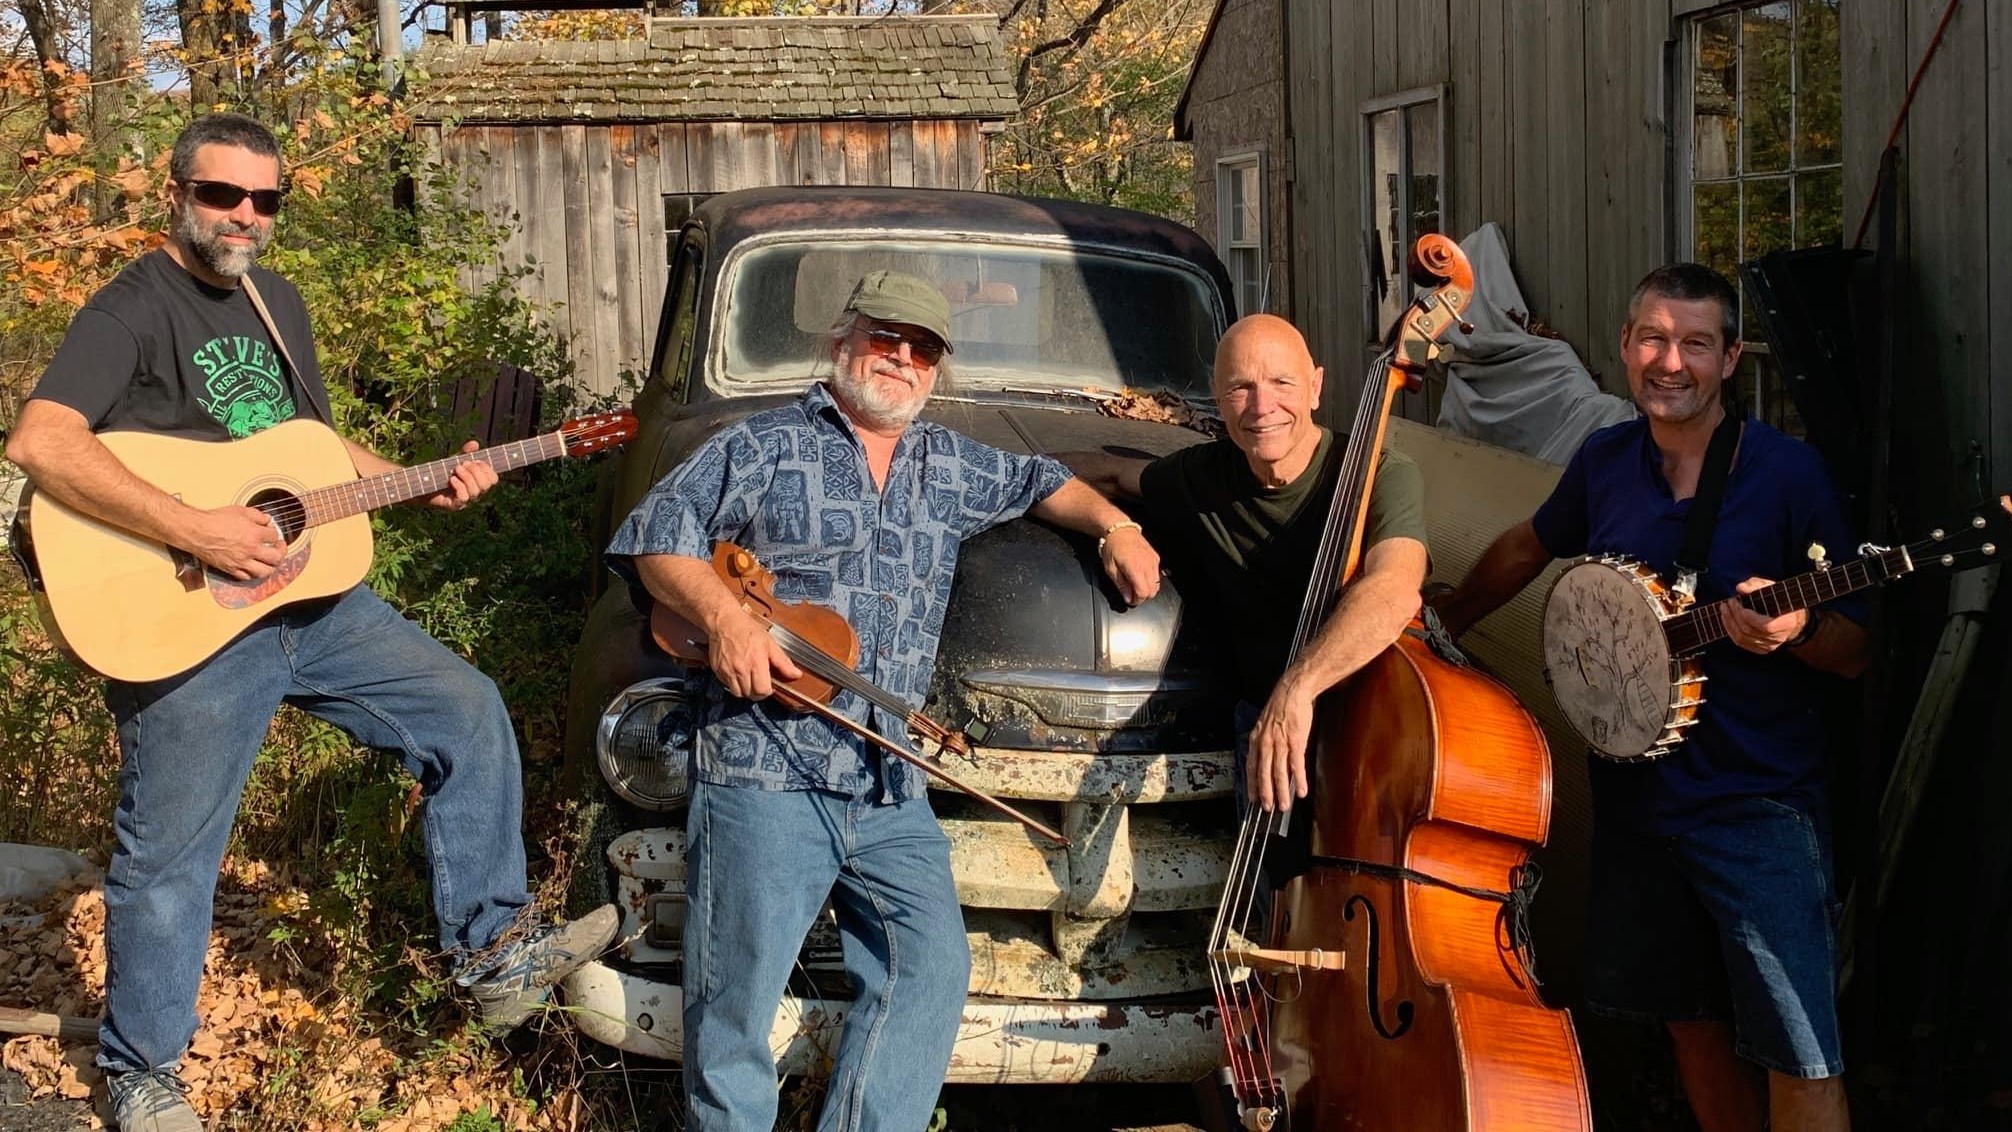 Four older white men stand in front of an old truck and rustic shack. They are holding instruments including a guitar, fiddle, stand-up bass, and banjo